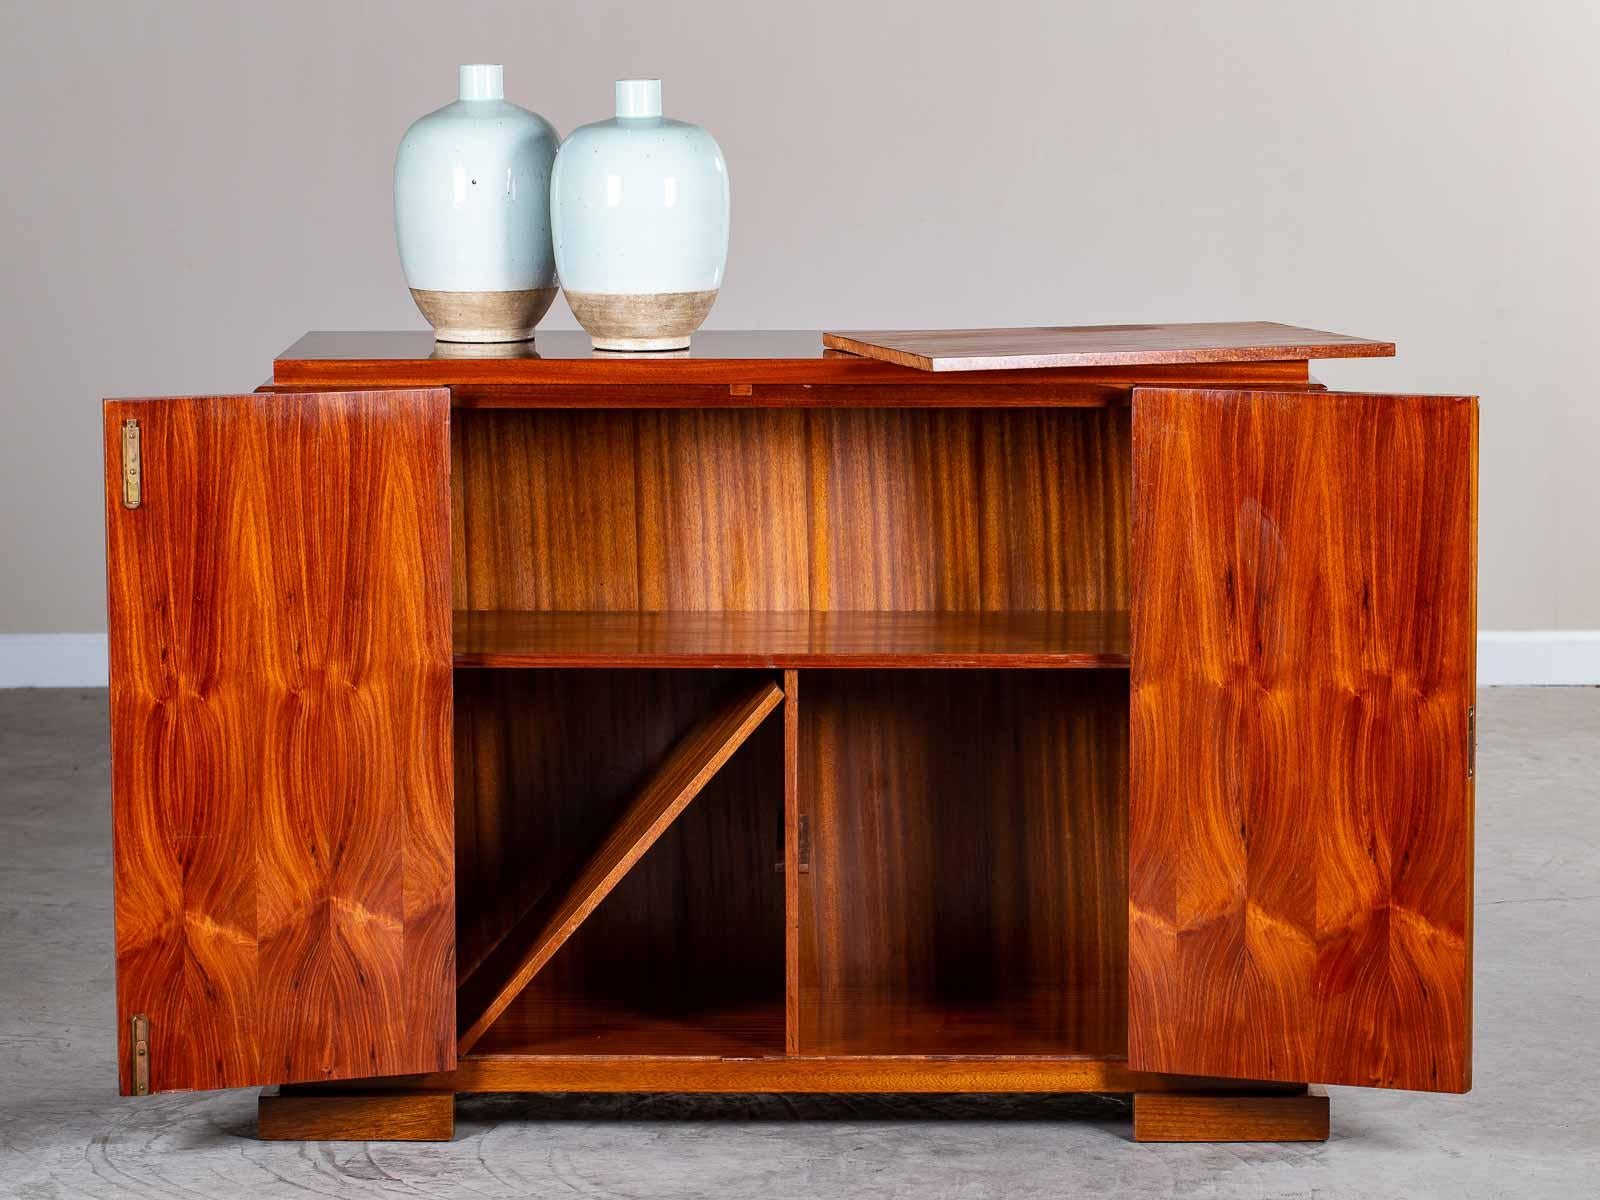 A vintage French Art Deco mahogany buffet credenza cabinet circa 1930 with a superb use of the mahogany grain to create a sense of movement across the façade. This exceptional two door vintage buffet cabinet showcases the cabinet making skill in